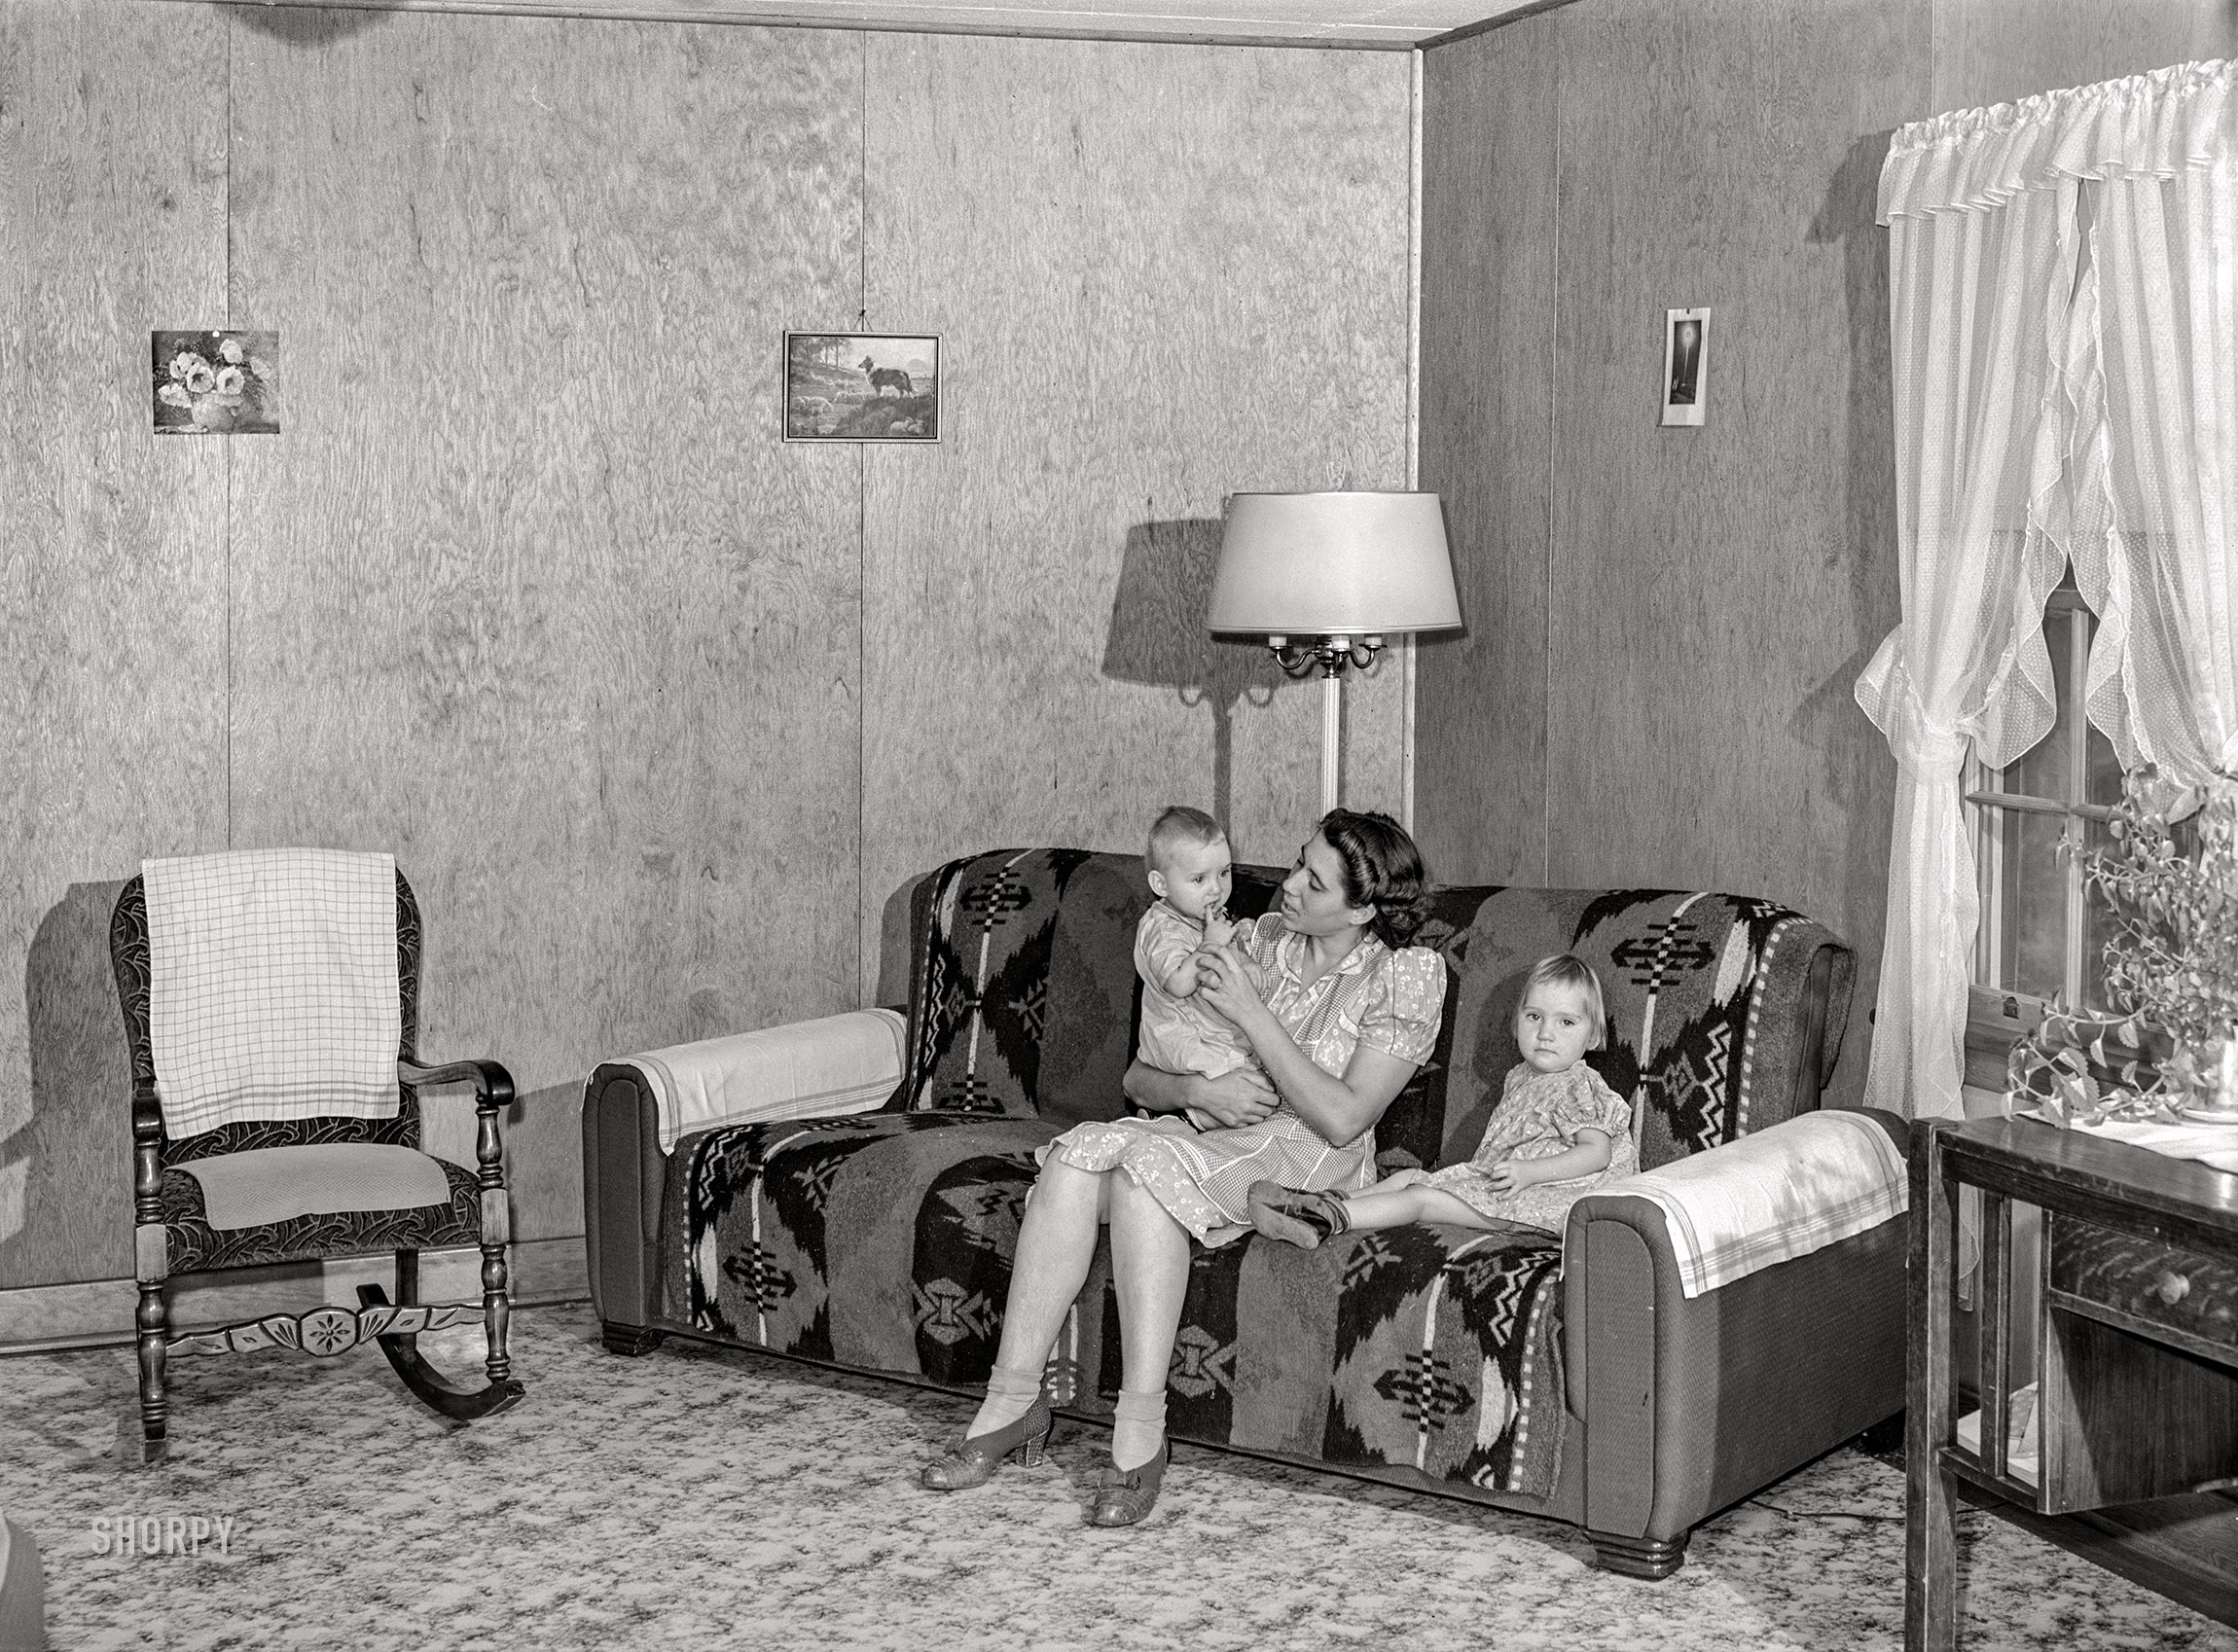 September 1941. "Living room of farm family, members of Boundary Farms FSA project." Acetate negative by Russell Lee for the Farm Security Administration. View full size.